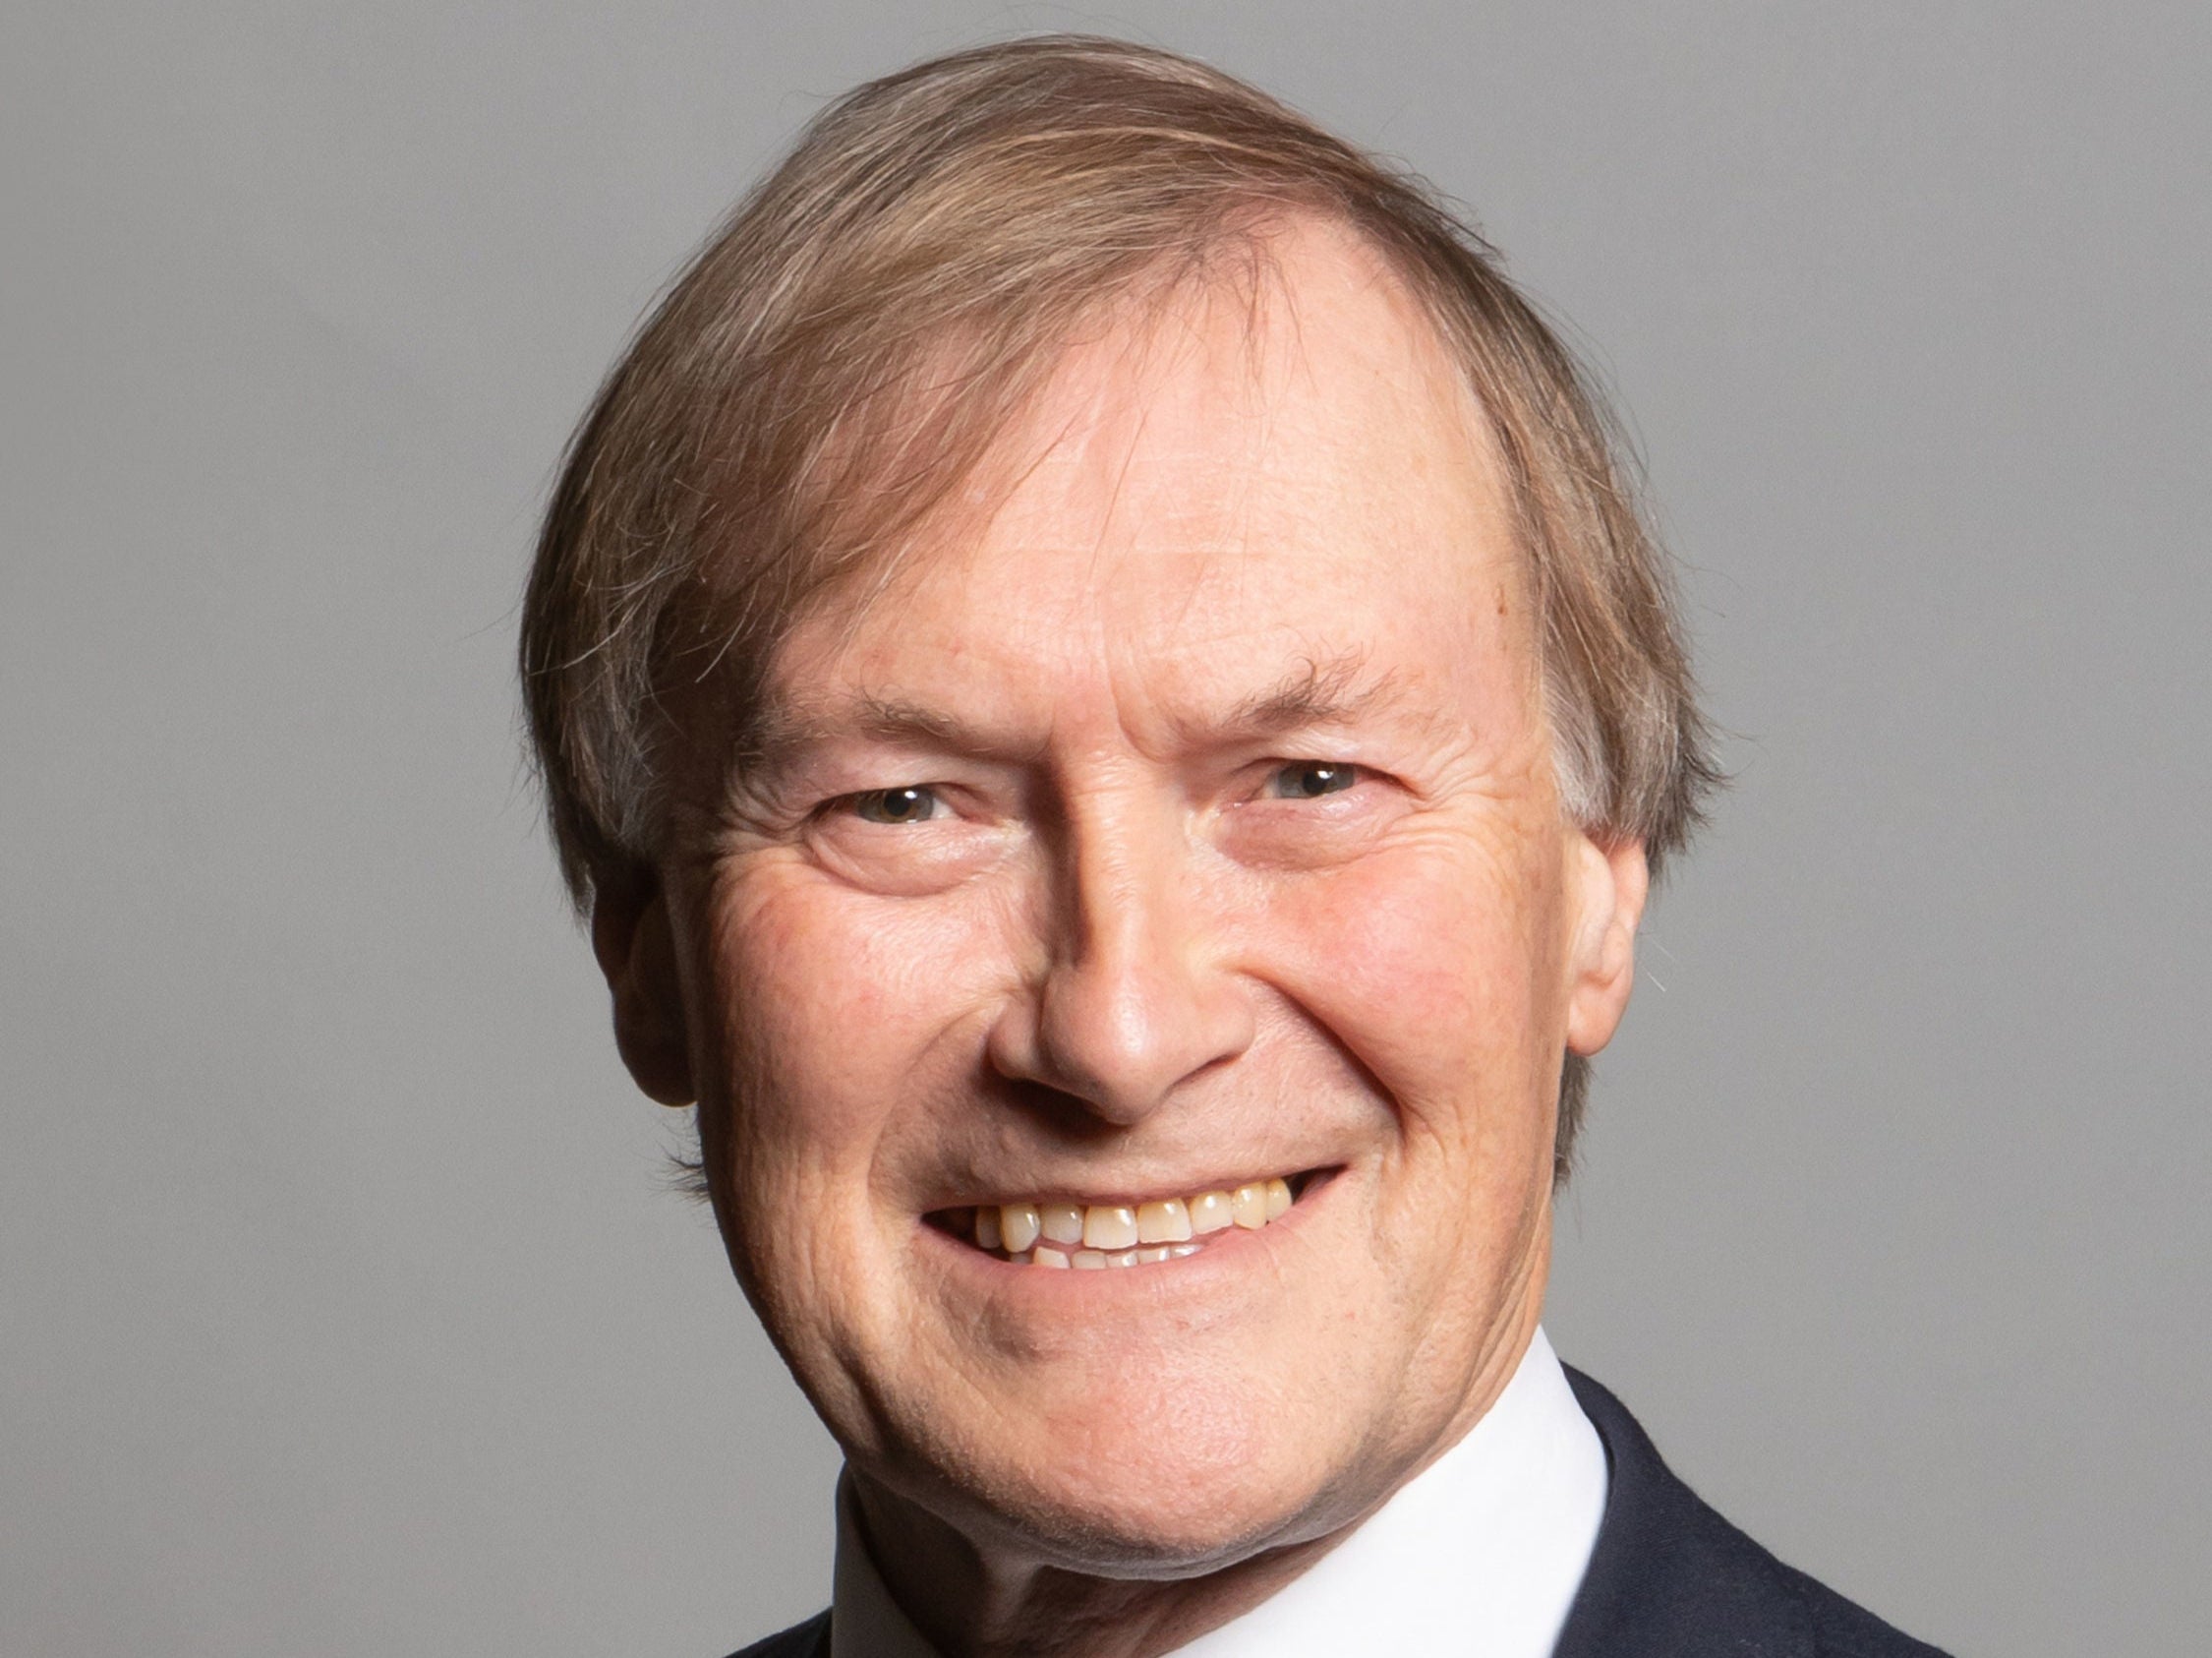 Southend MP Sir David Amess was murdered on 15 October